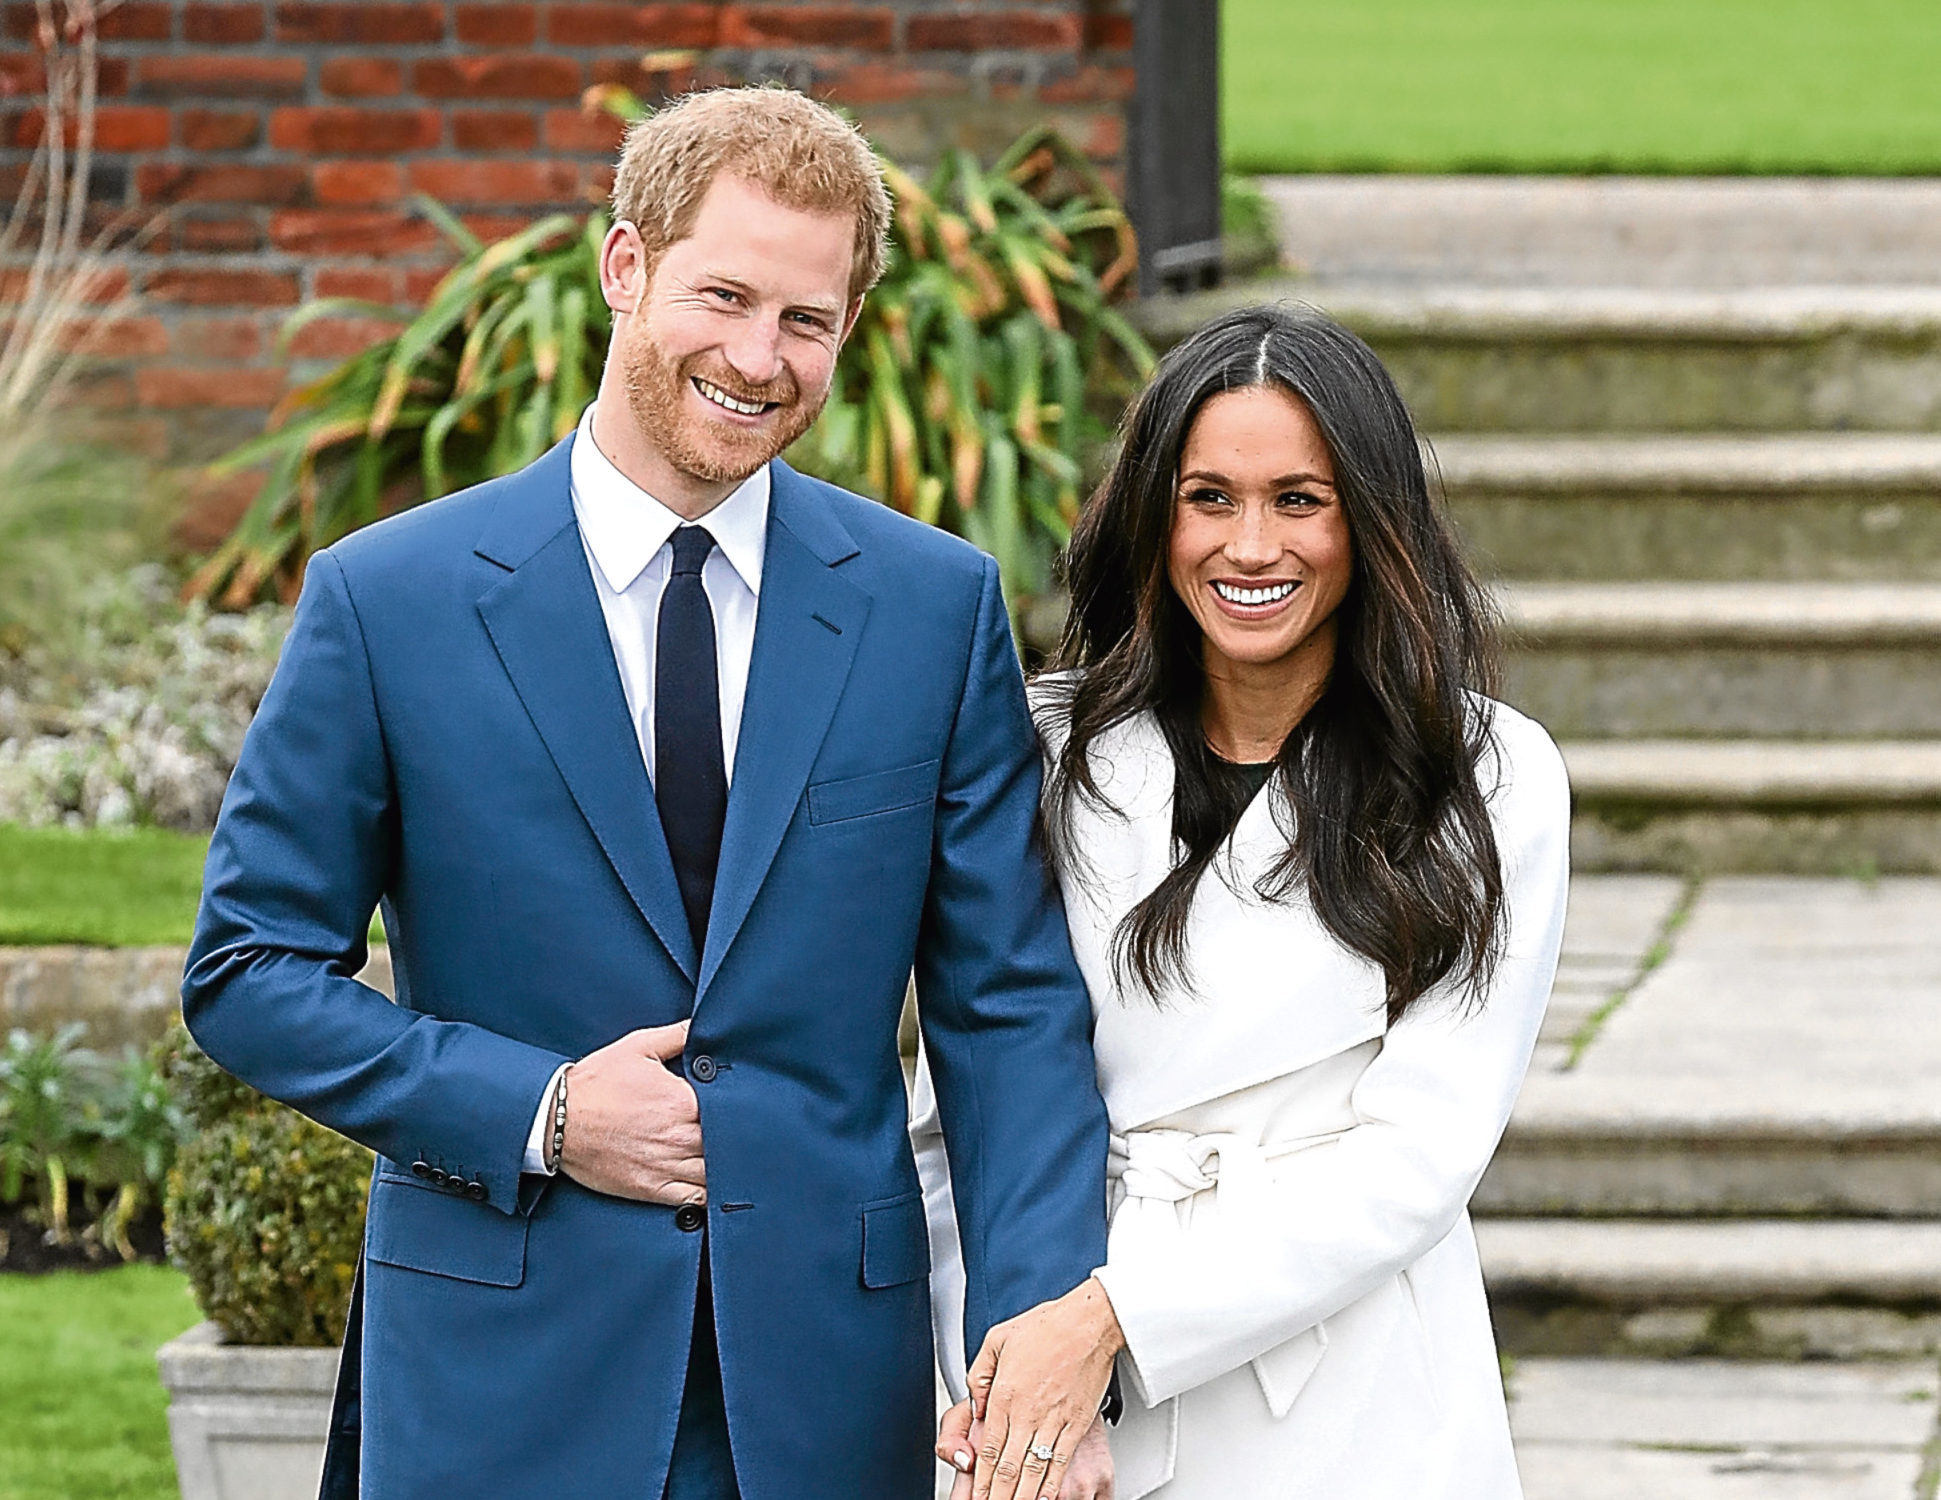 Prince Harry and actress Meghan Markle (Getty Images)